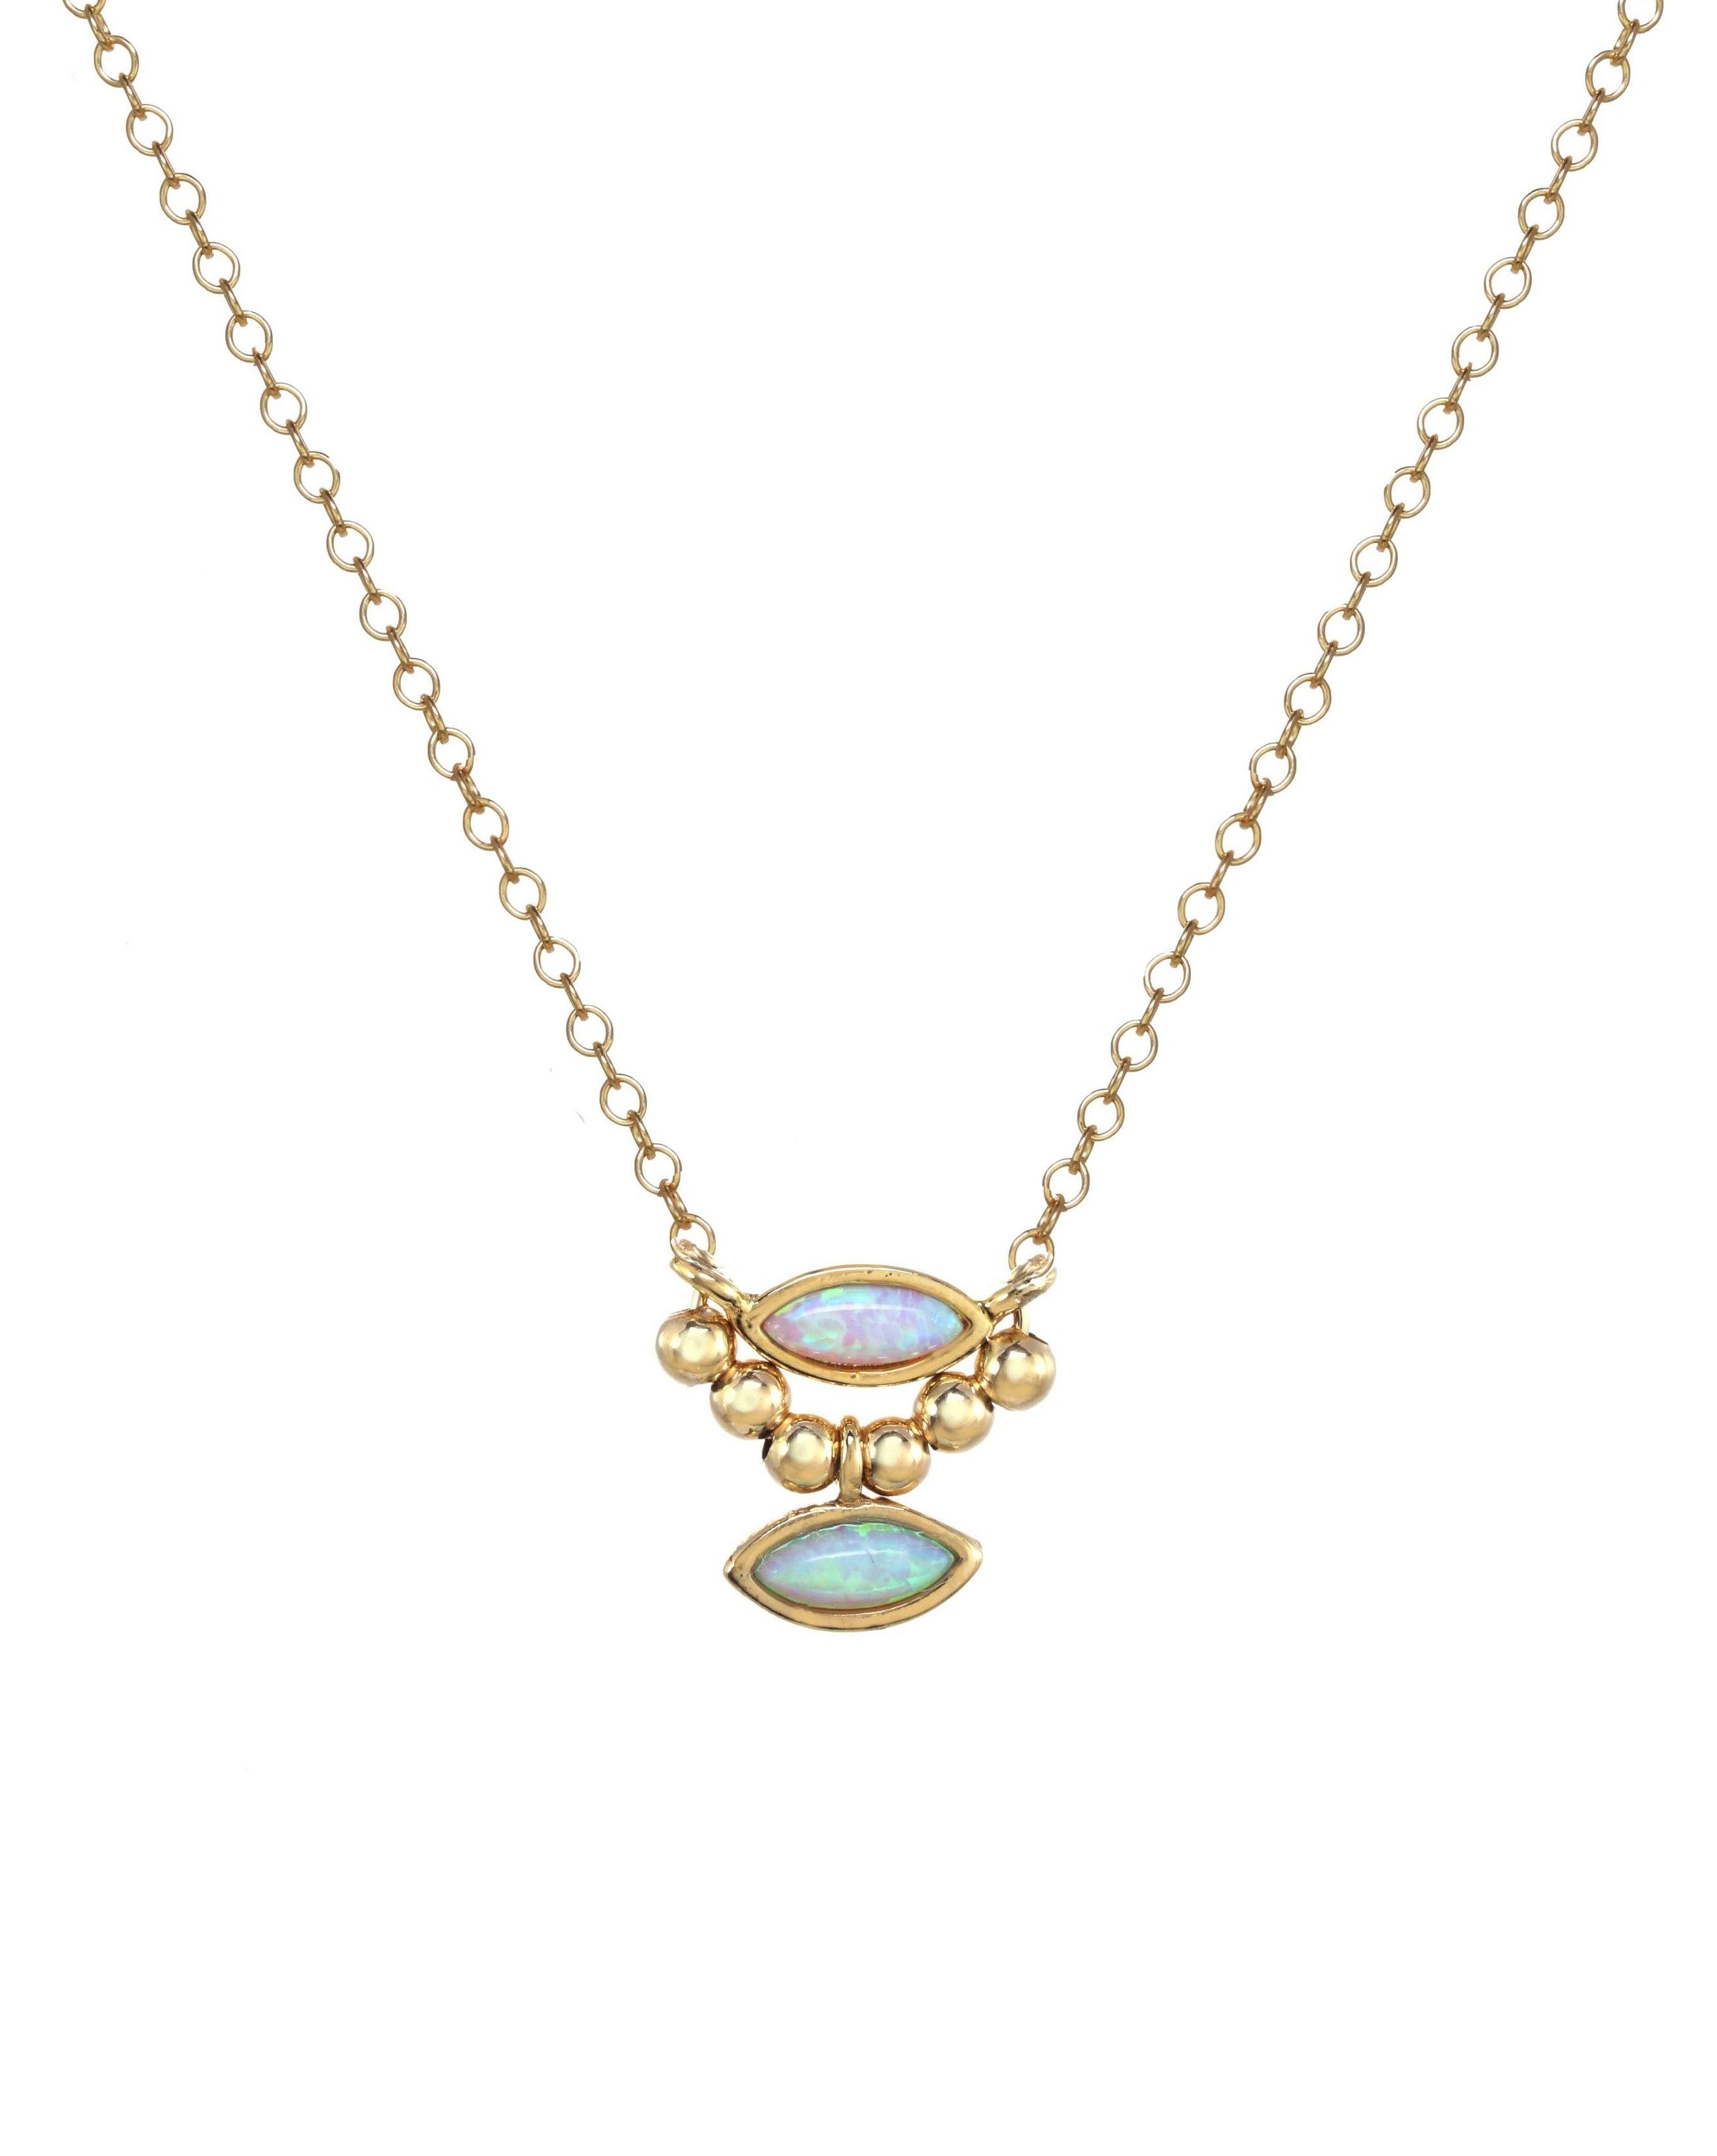 Alastar Necklace by KOZAKH. A 16 to 18 inch adjustable length necklace in 14K Gold Filled, featuring Marquise Opal charms and 2mm Gold Filled balls.